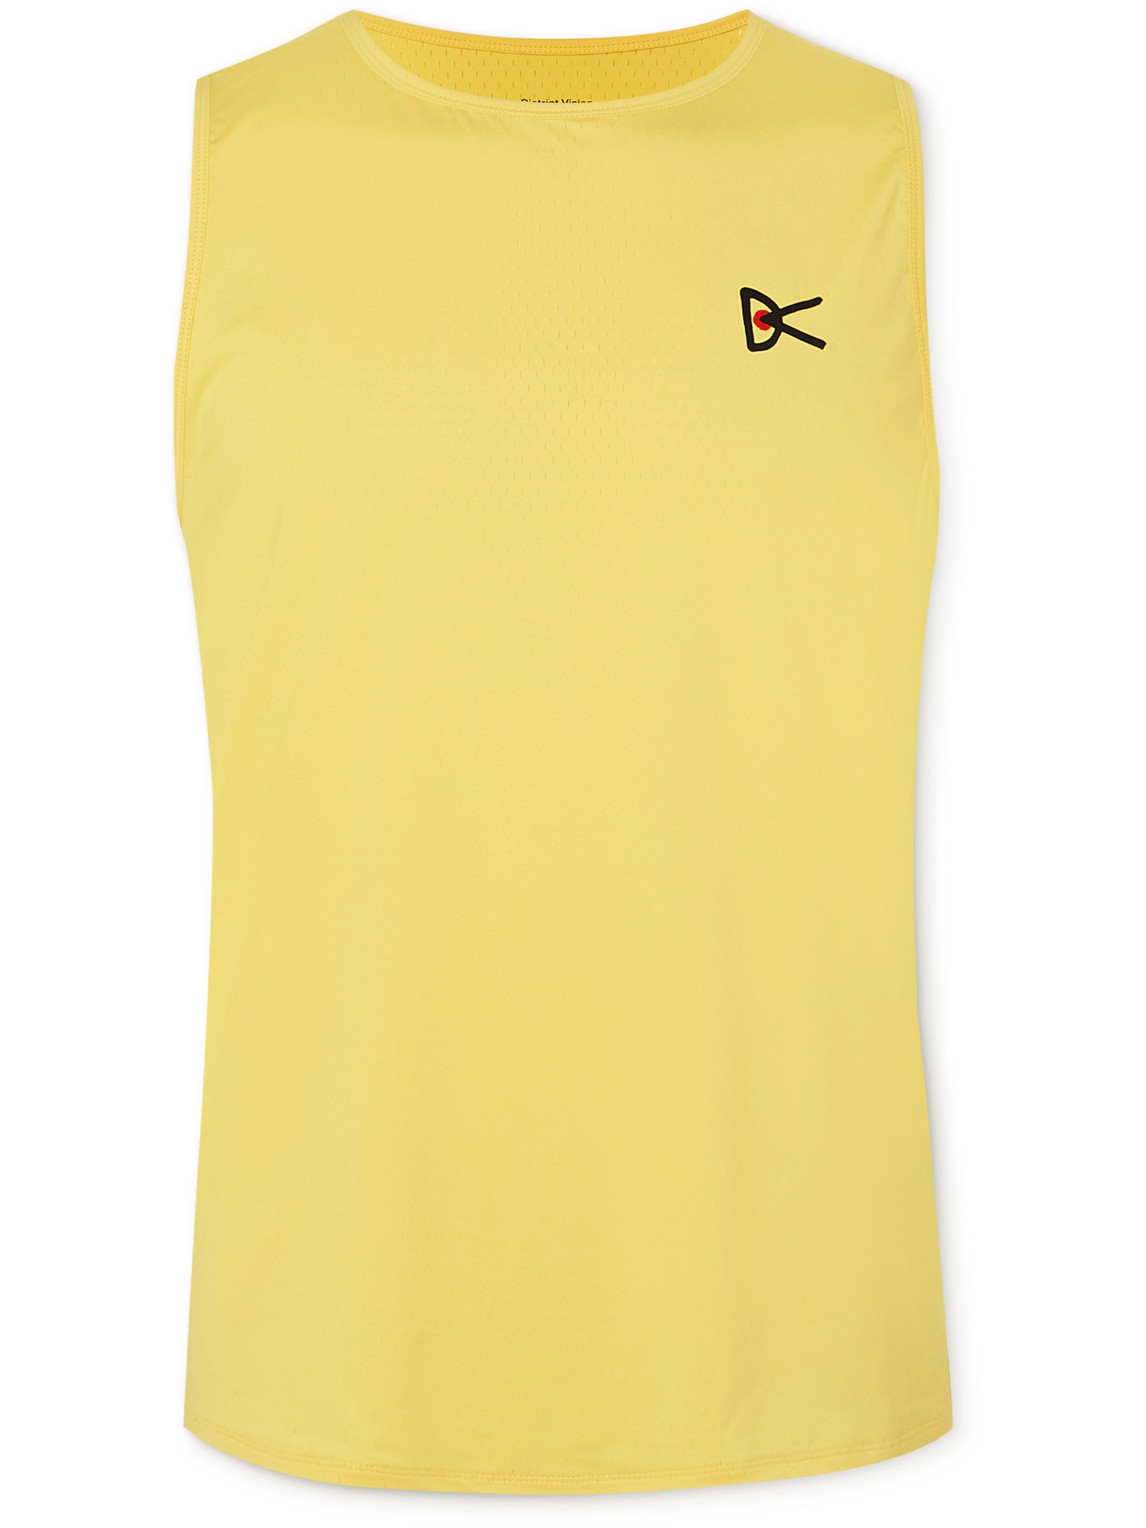 DISTRICT VISION AIR-WEAR STRETCH-JERSEY TANK TOP